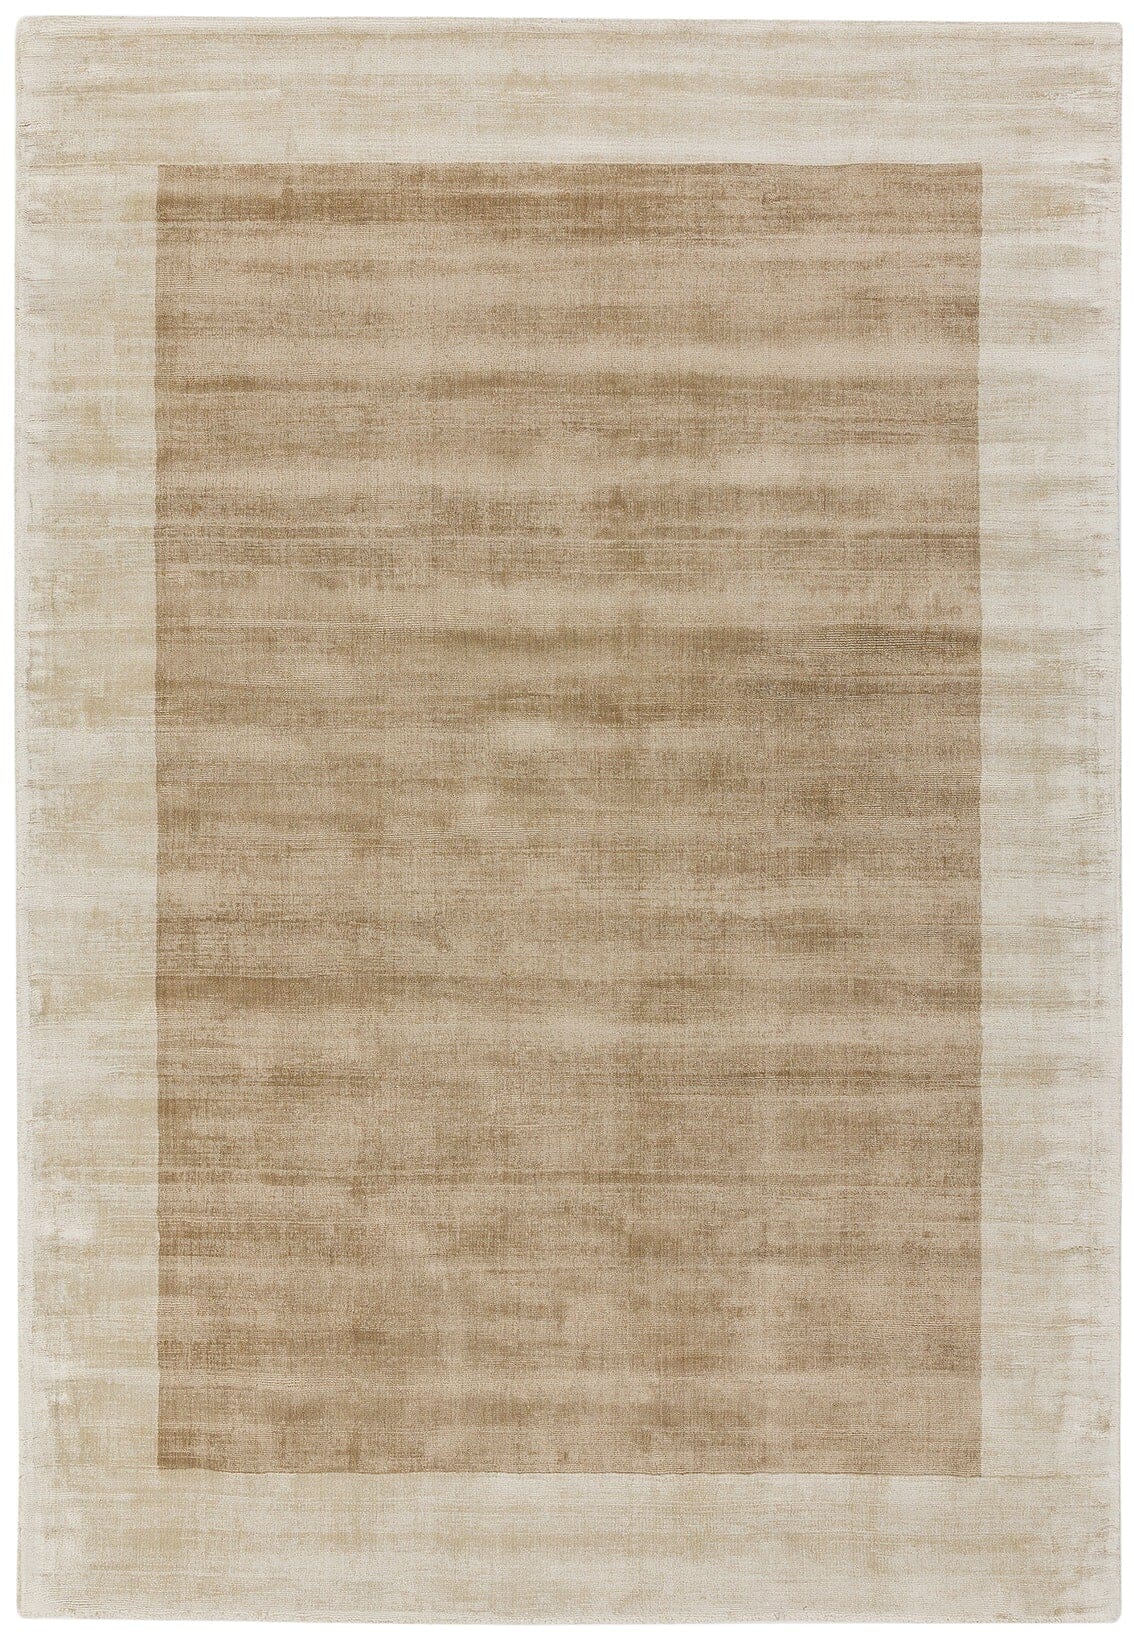 Blade Border Putty Champagne Hand Woven Rug